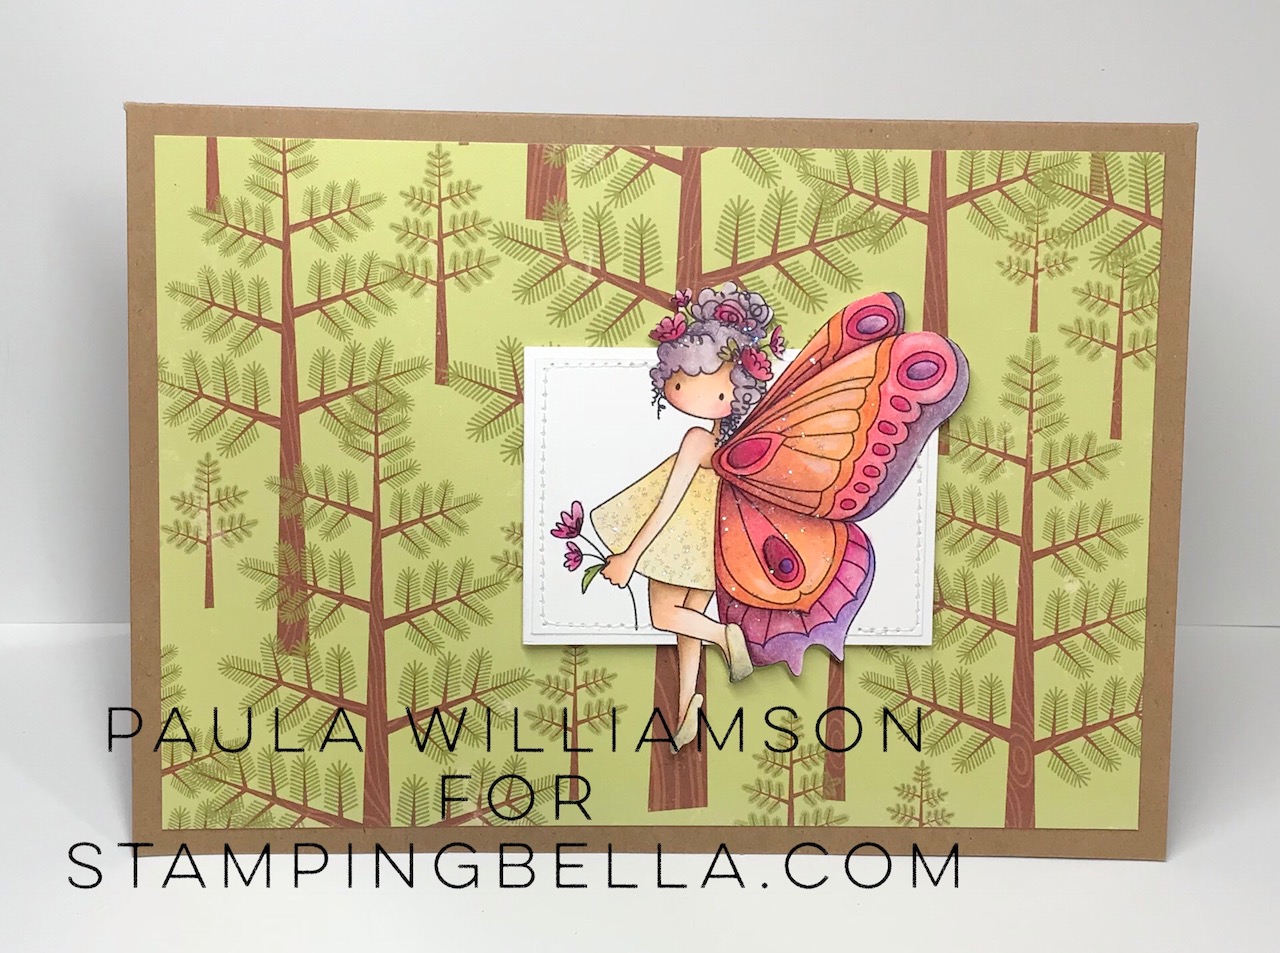 www.stampingbella.com: rubber stamp used : Tiny Townie butterfly girl Brianna , card by Paula Williamson